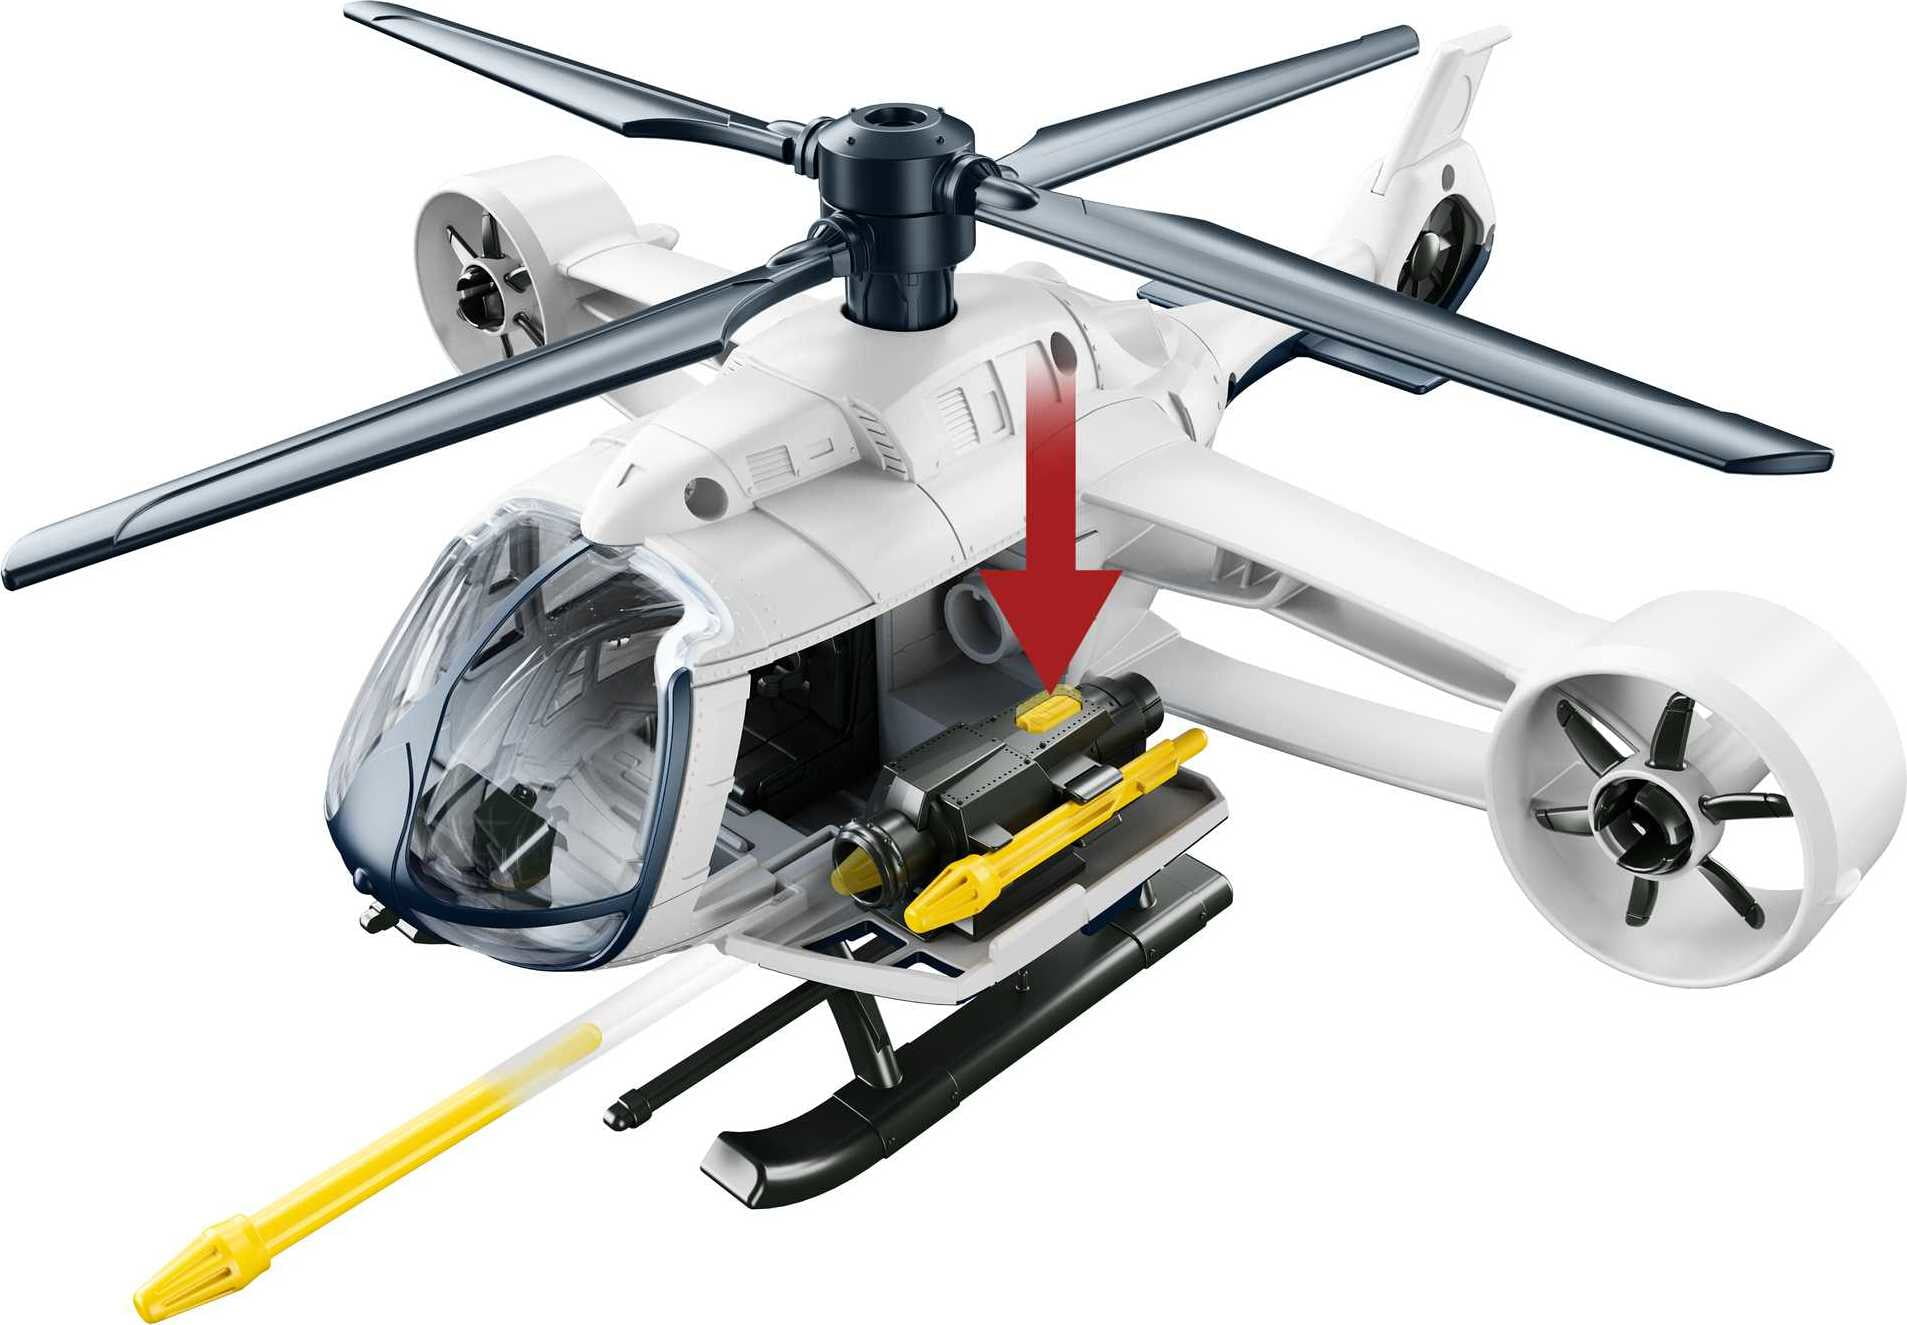 Jurassic World Dominion Copter Combat Pack with Helicopter, DinosaurToy & Kayla Action Figure